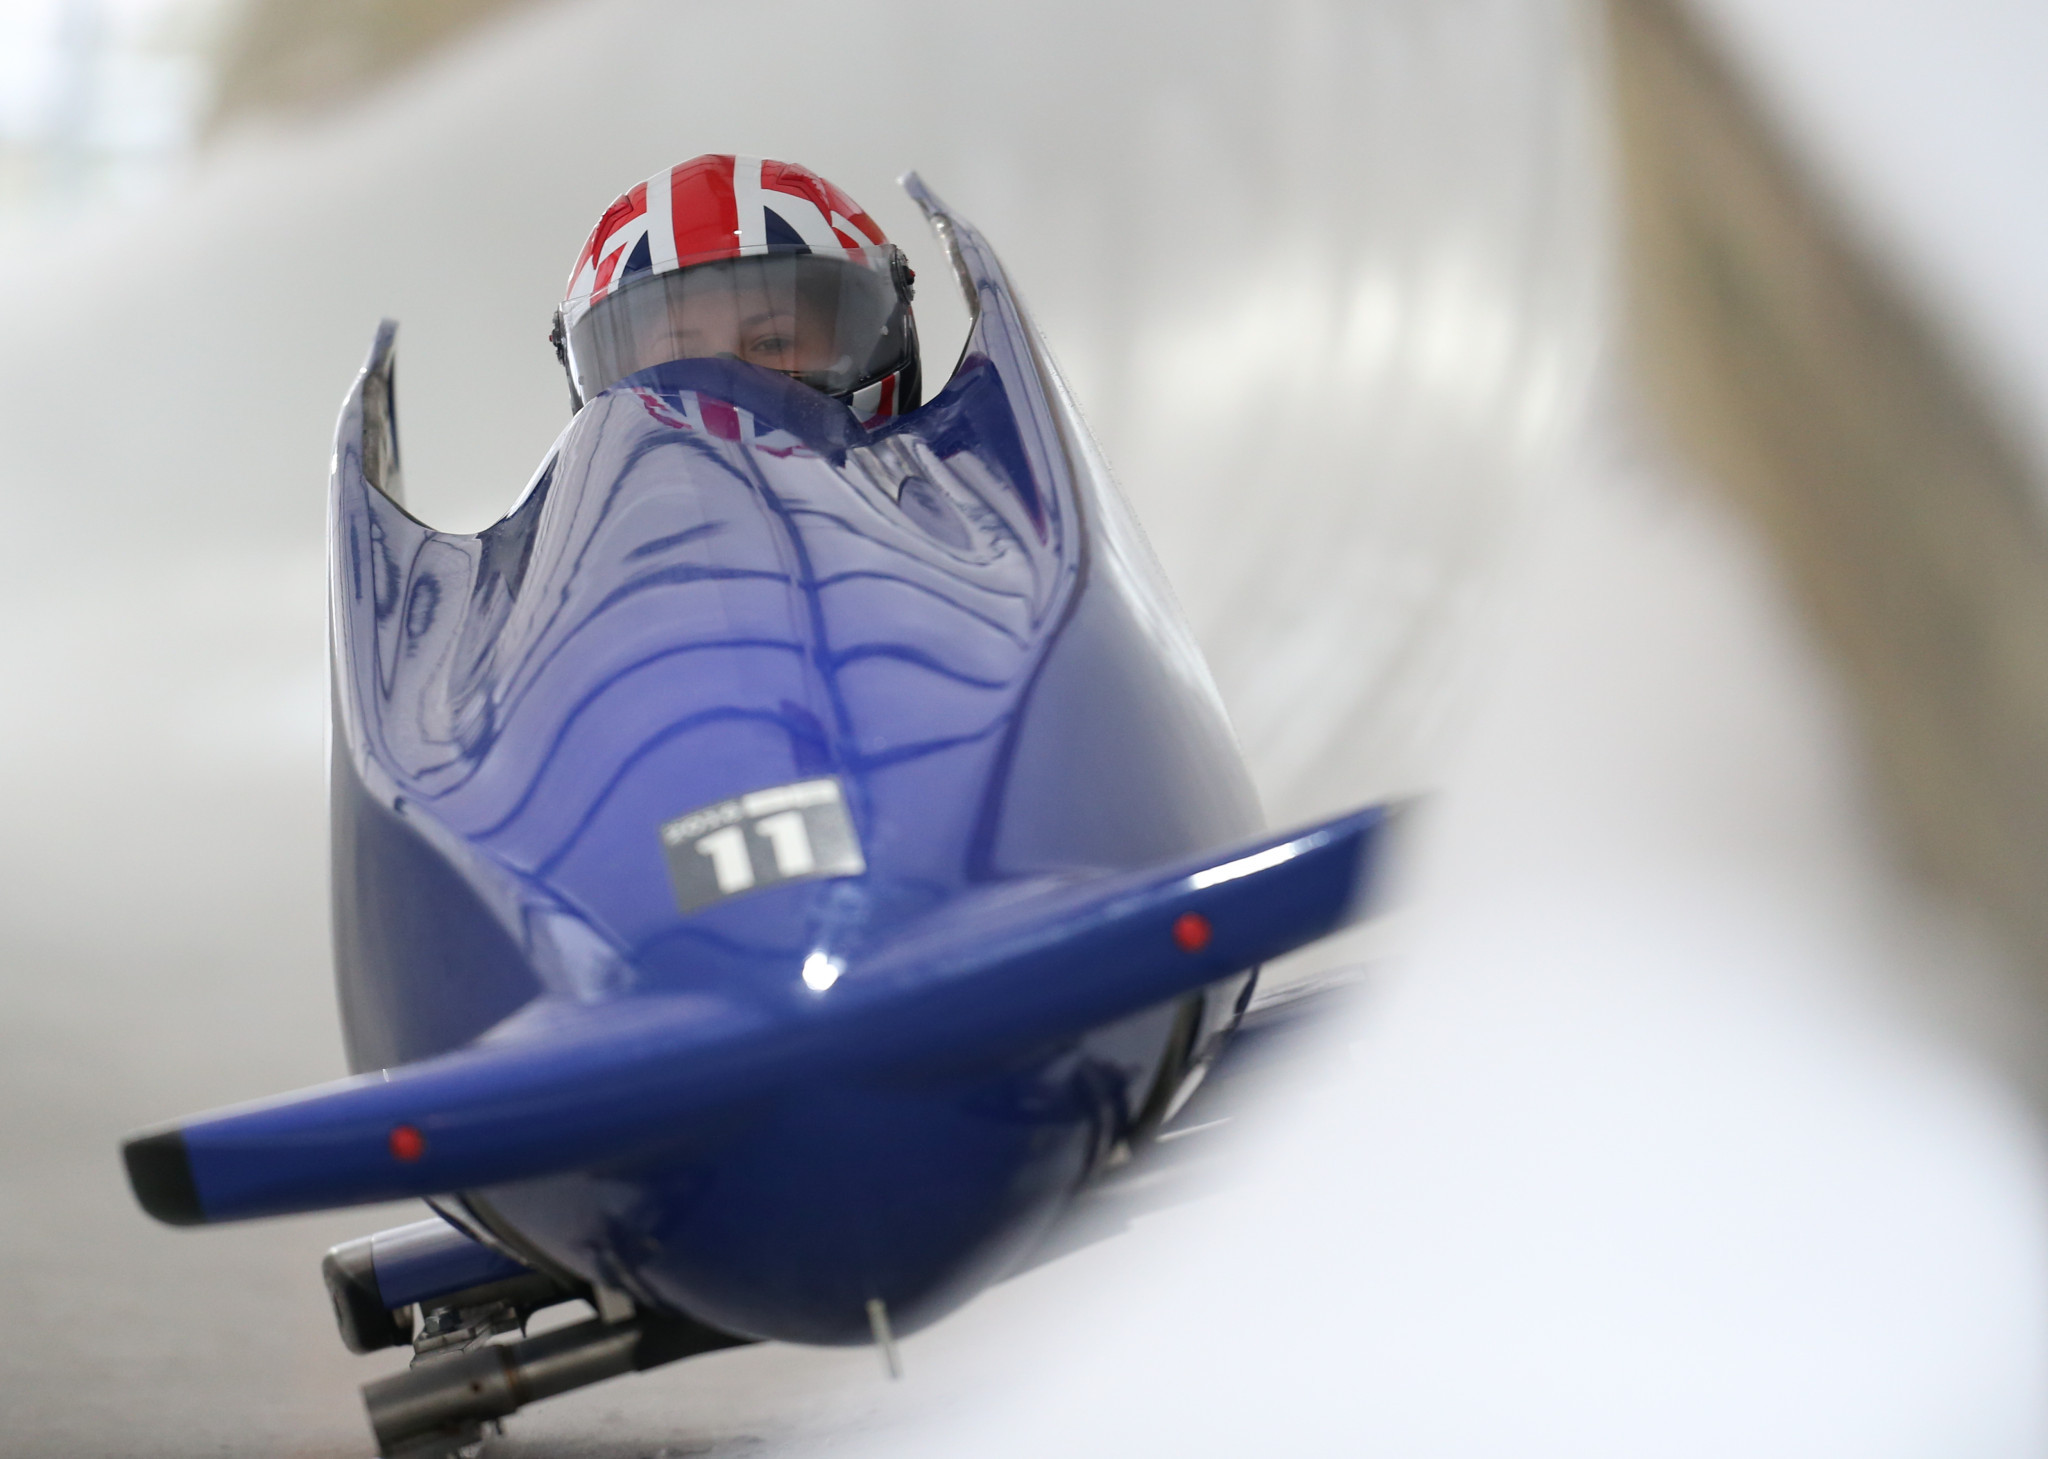 Women's monobob - one-person bobsleigh - will be a medal event at the Beijing 2022 Winter Olympic Games ©Getty Images